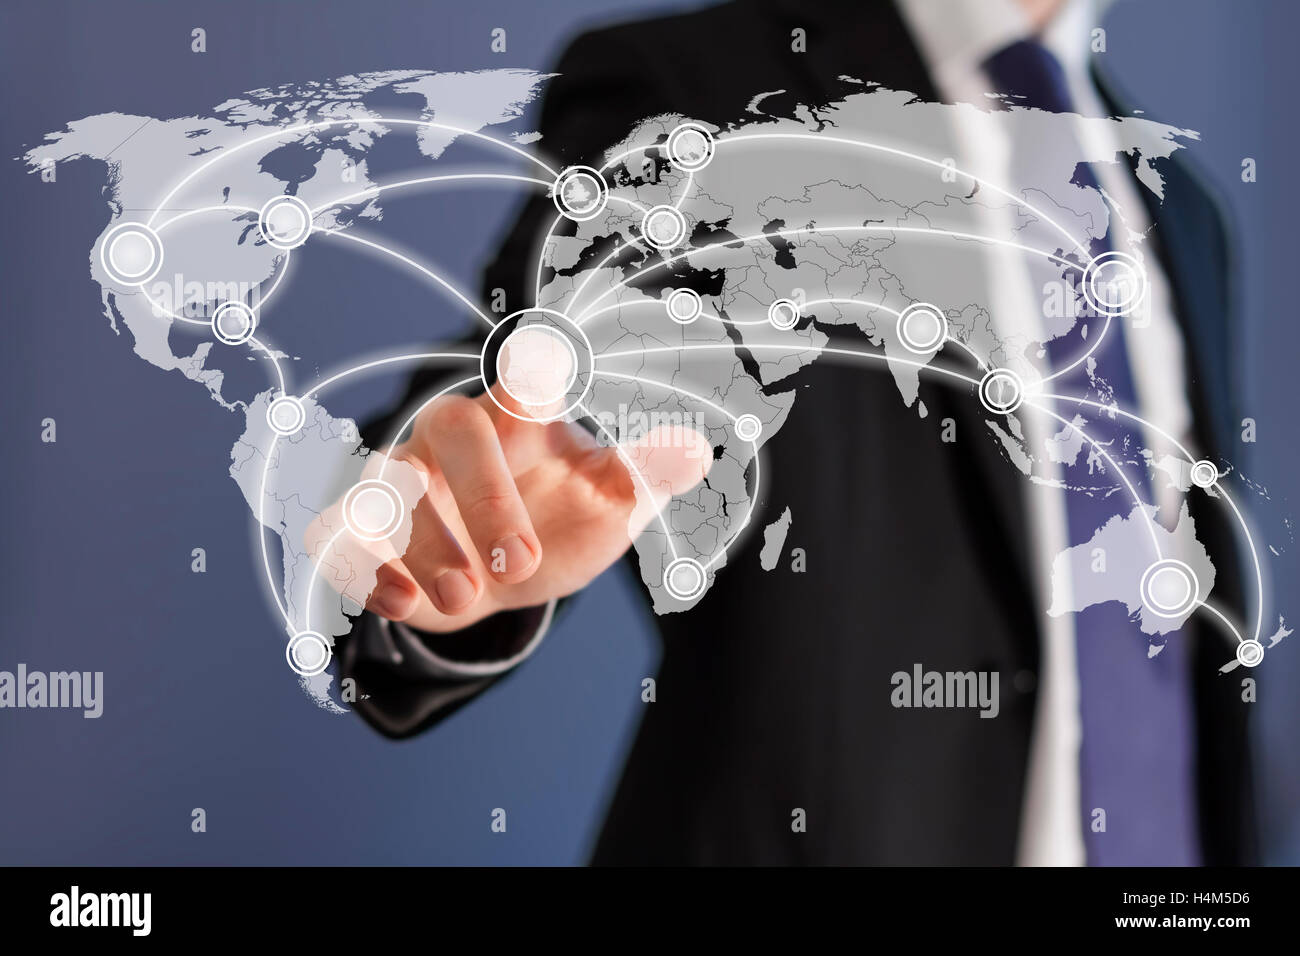 Social networks are worldwide as shown by a businessman on a world map touch screen Stock Photo